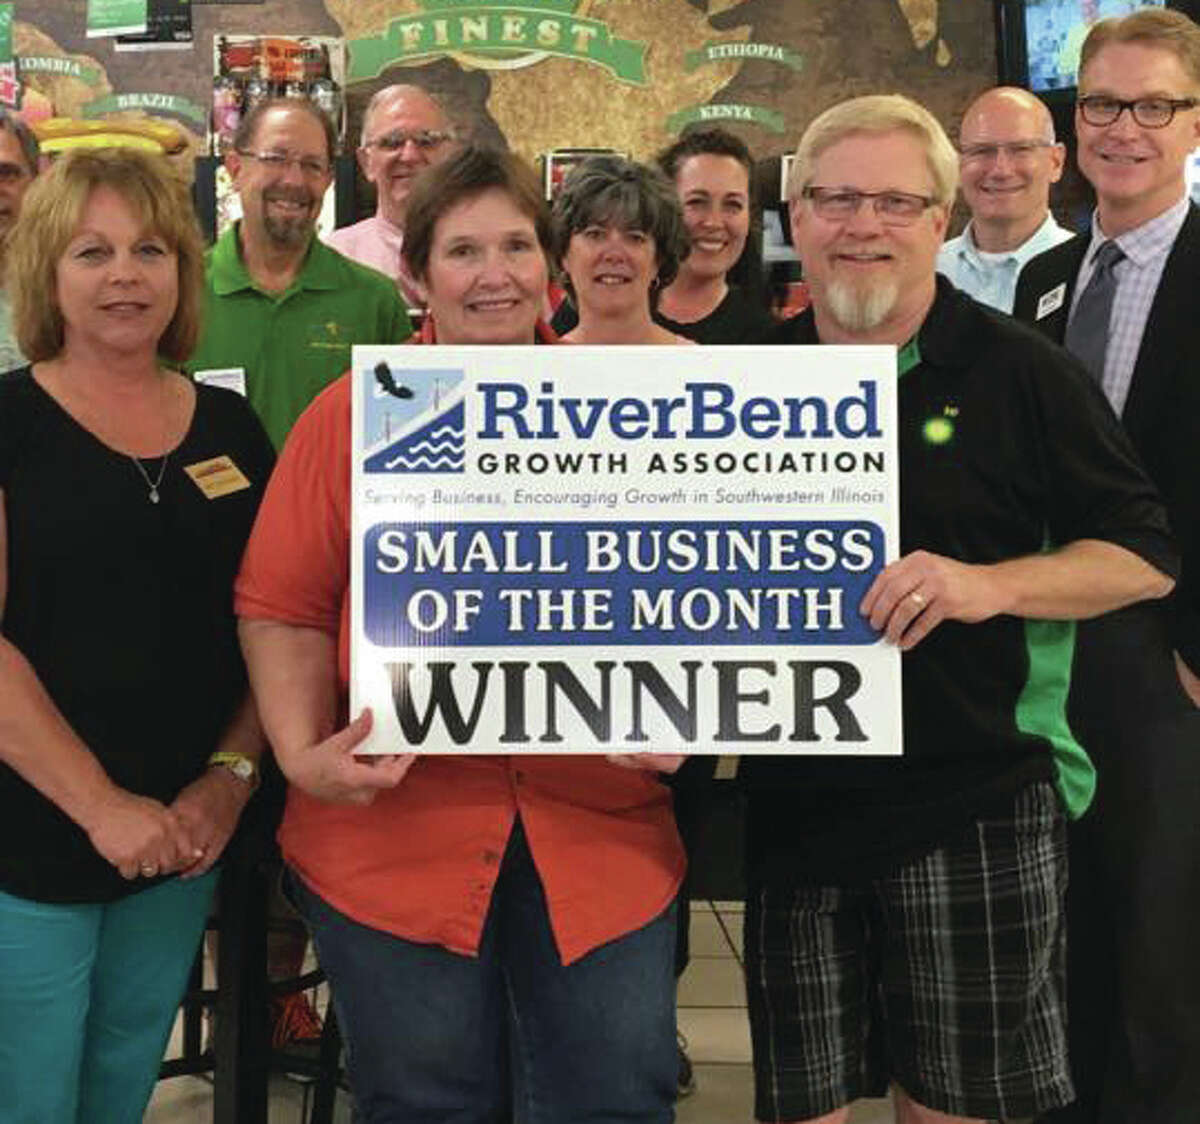 Owners Jim and Patty Eppel pose with members of the RiverBend Growth Association. Their business, Eppel’s Pantry and Deli, won the association’s Business of the Month award in June.